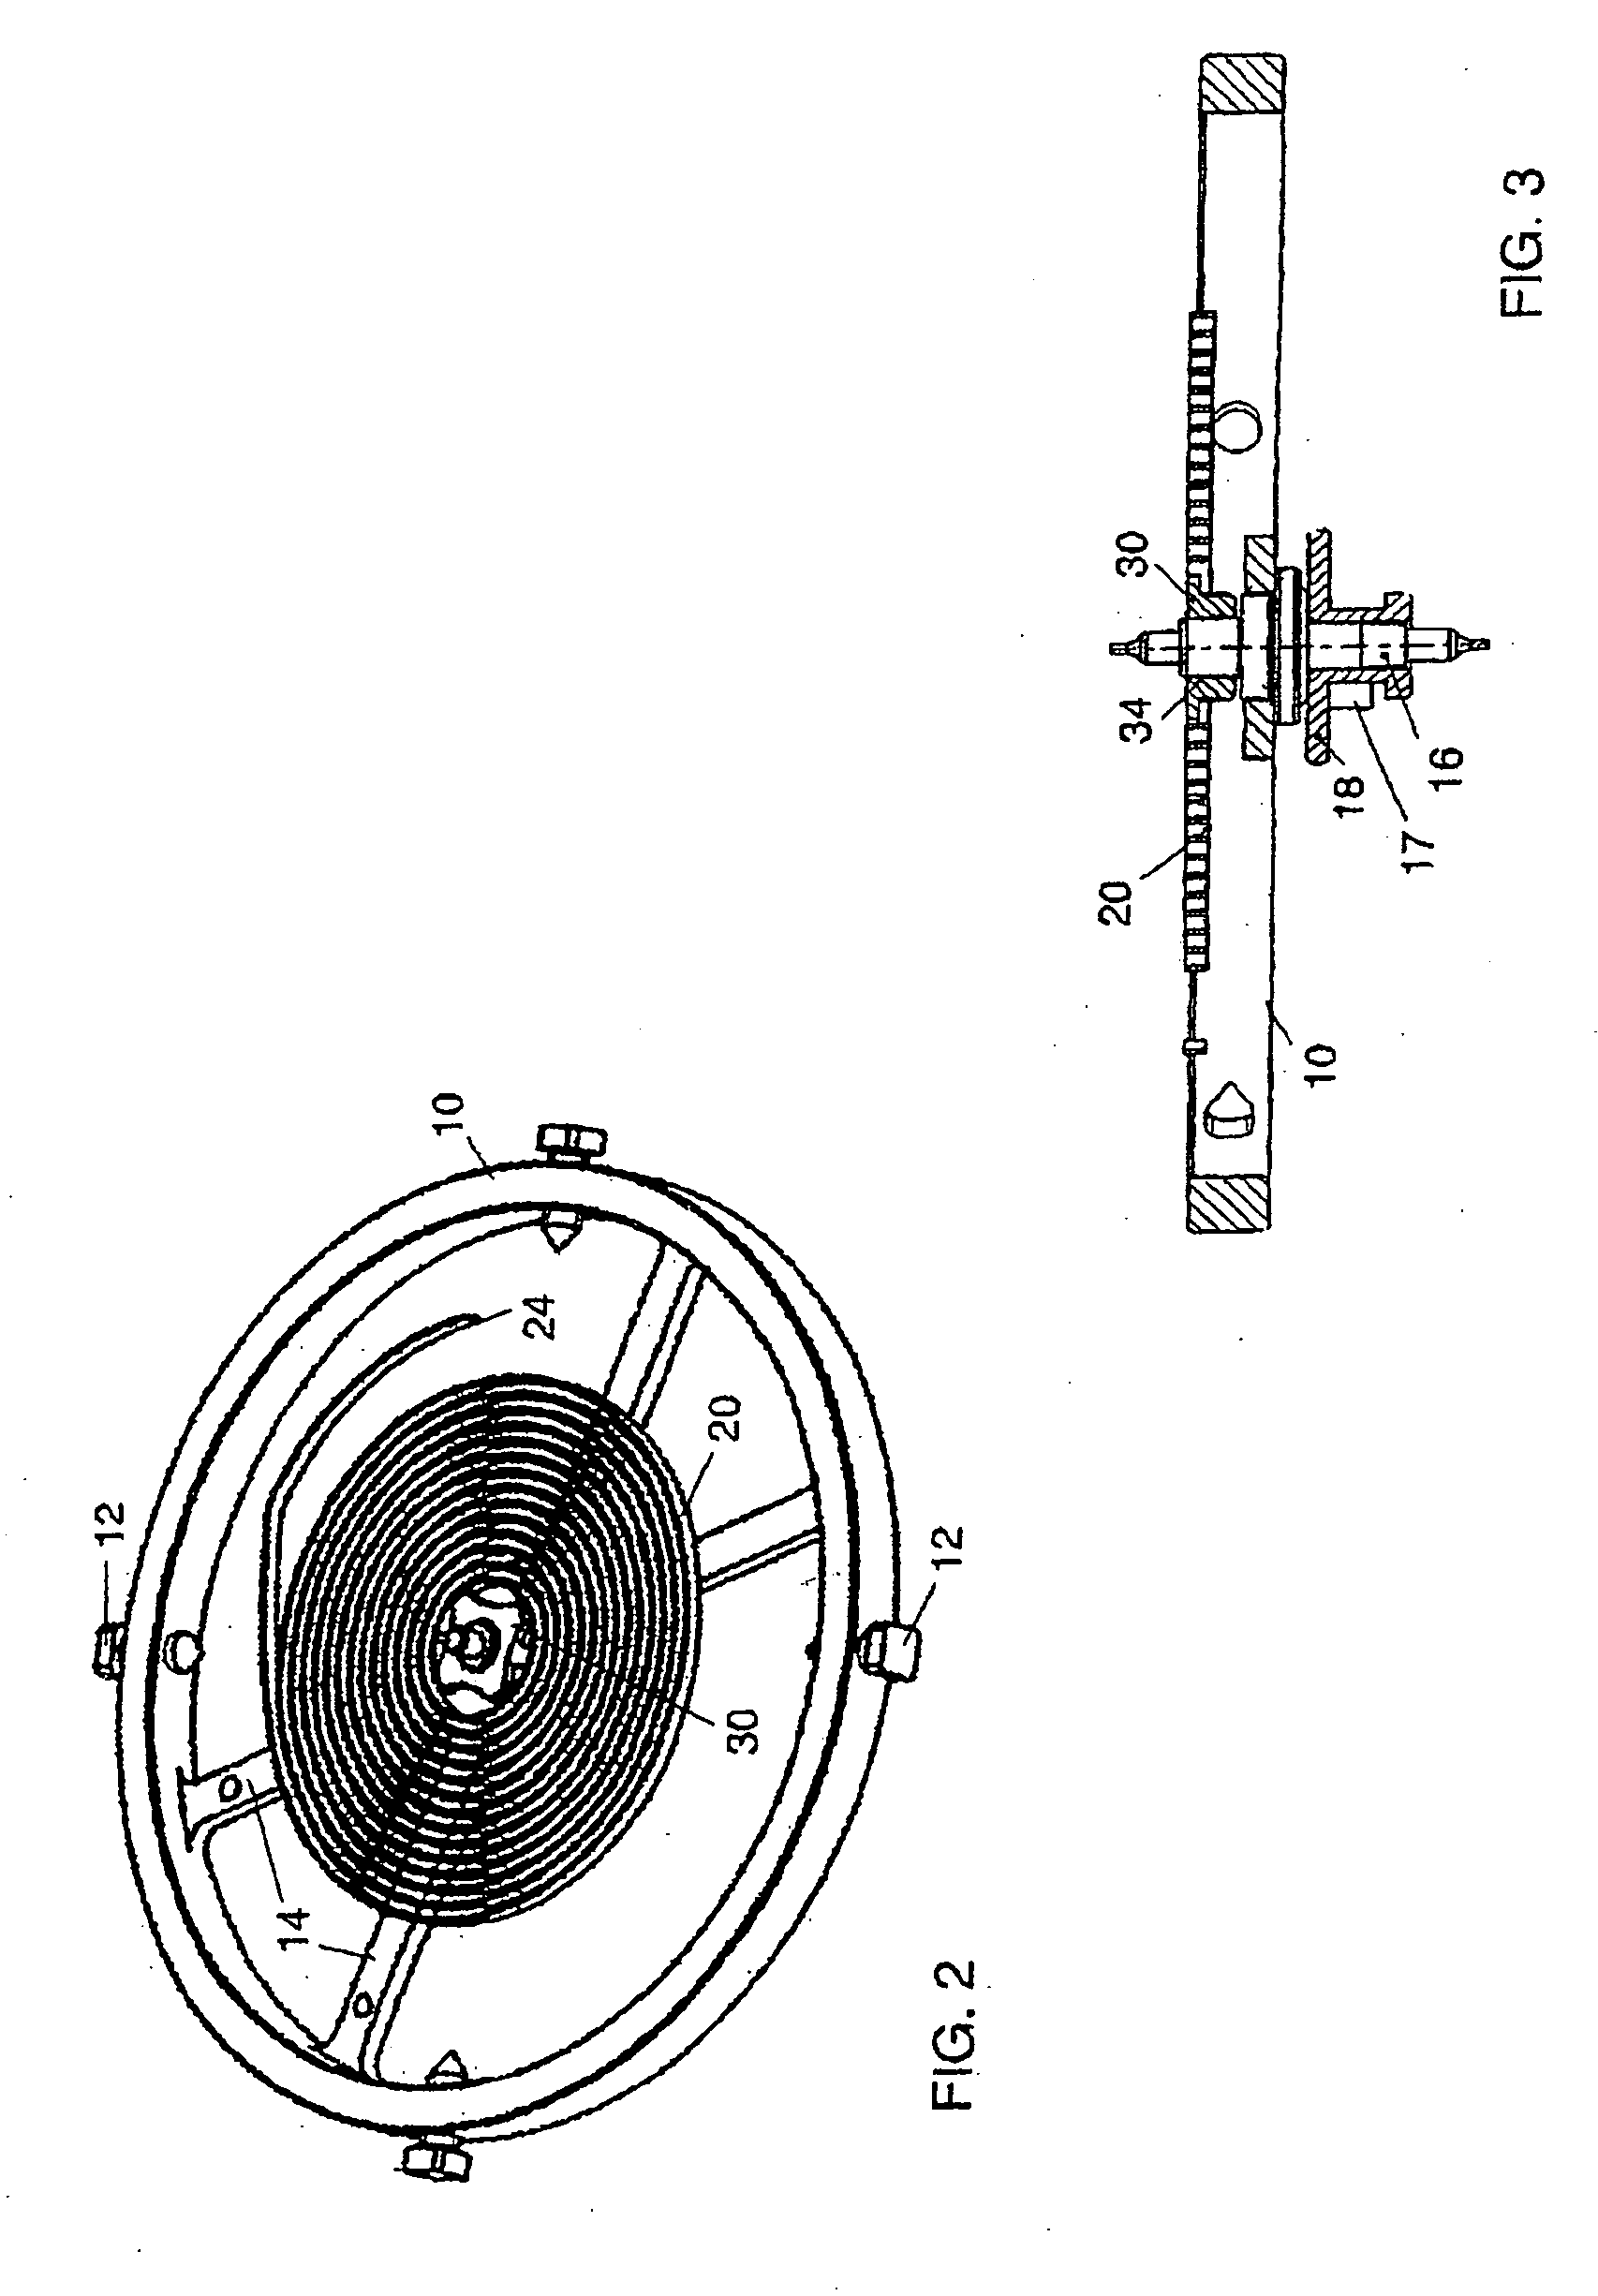 Fixation of a spiral spring in a watch movement